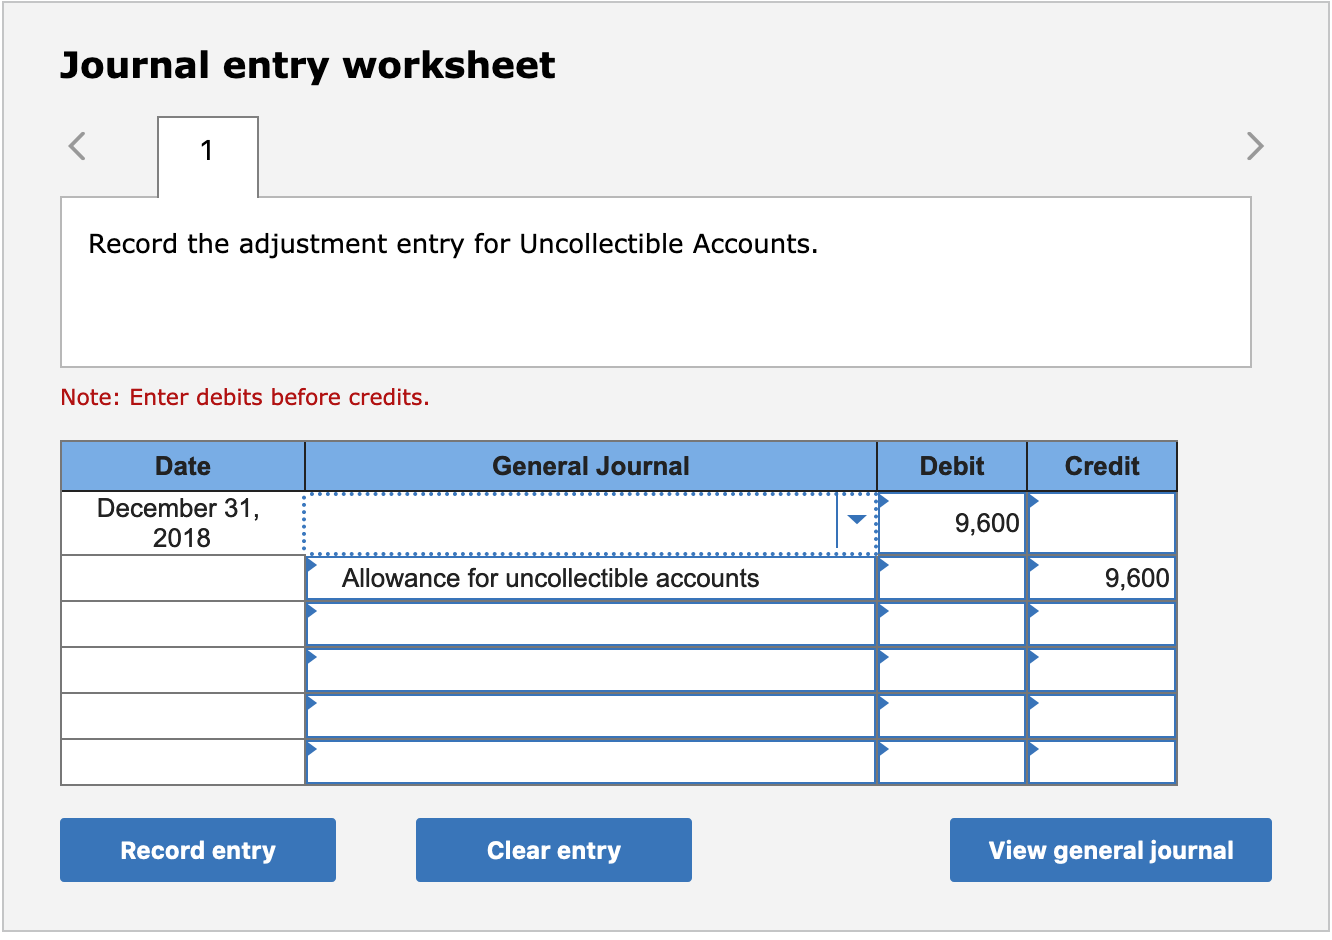 Journal entry worksheet
Record the adjustment entry for Uncollectible Accounts.
Note: Enter debits before credits.
Date
General Journal
Debit
Credit
December 31,
9,600
2018
Allowance for uncollectible accounts
9,600
Record entry
Clear entry
View general journal
